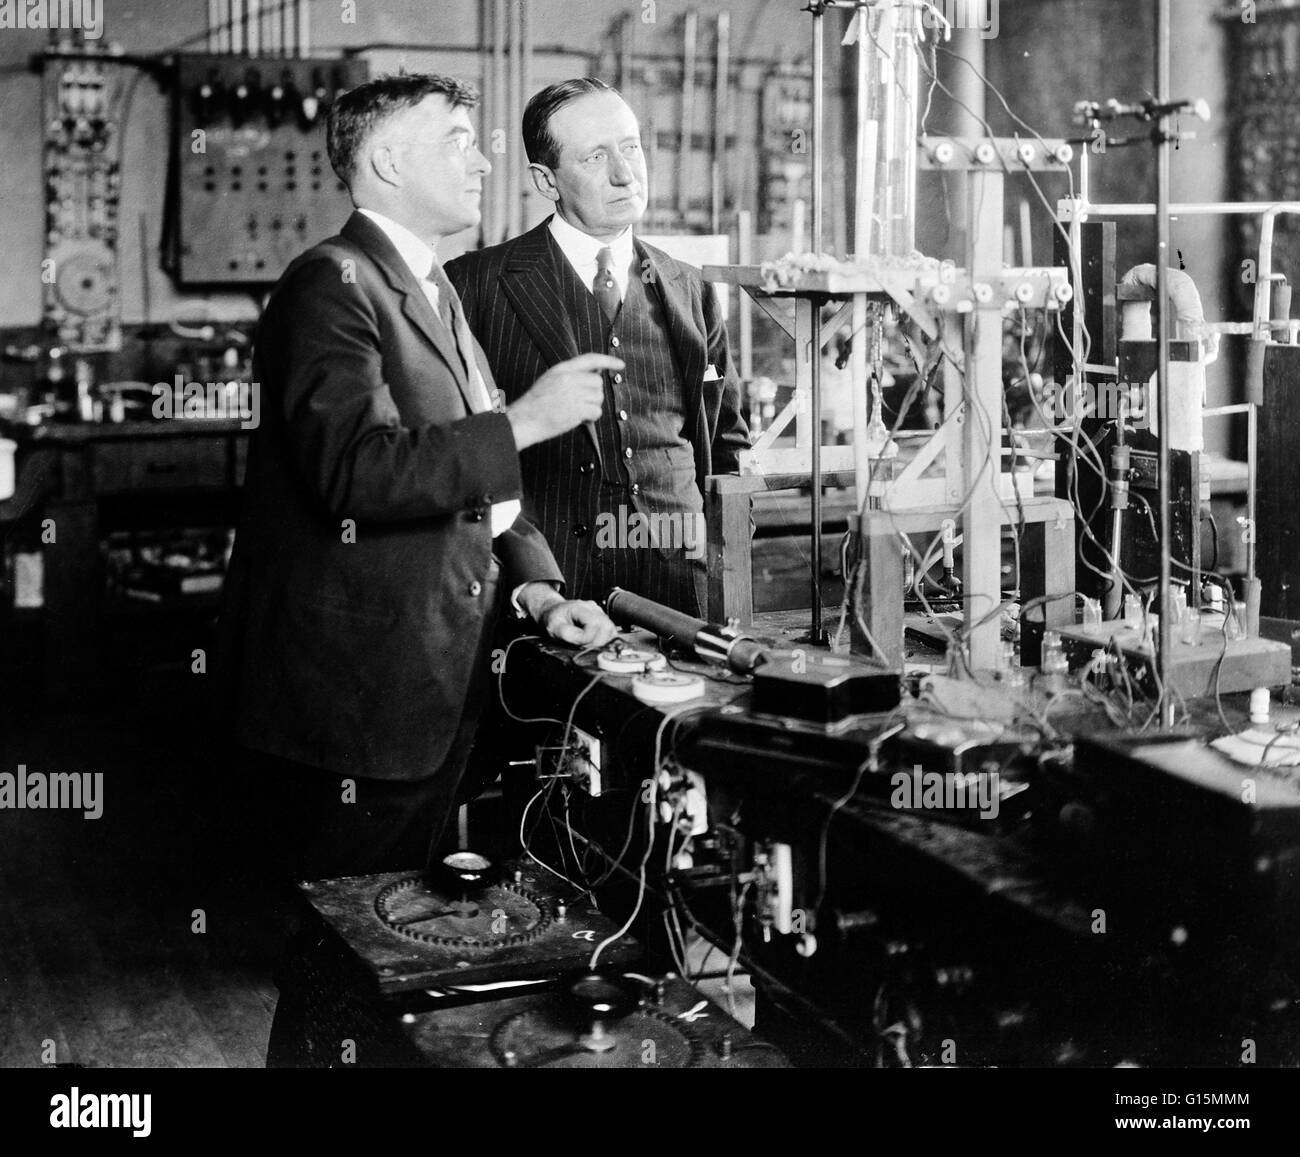 Langmuir and Marconi in the General Electric Research Laboratory, New York, 1922. Irving Langmuir ( January 31, 1881 - August 16, 1957) was an American chemist and physicist. He advanced several basic fields of physics and chemistry, invented the gas-fill Stock Photo